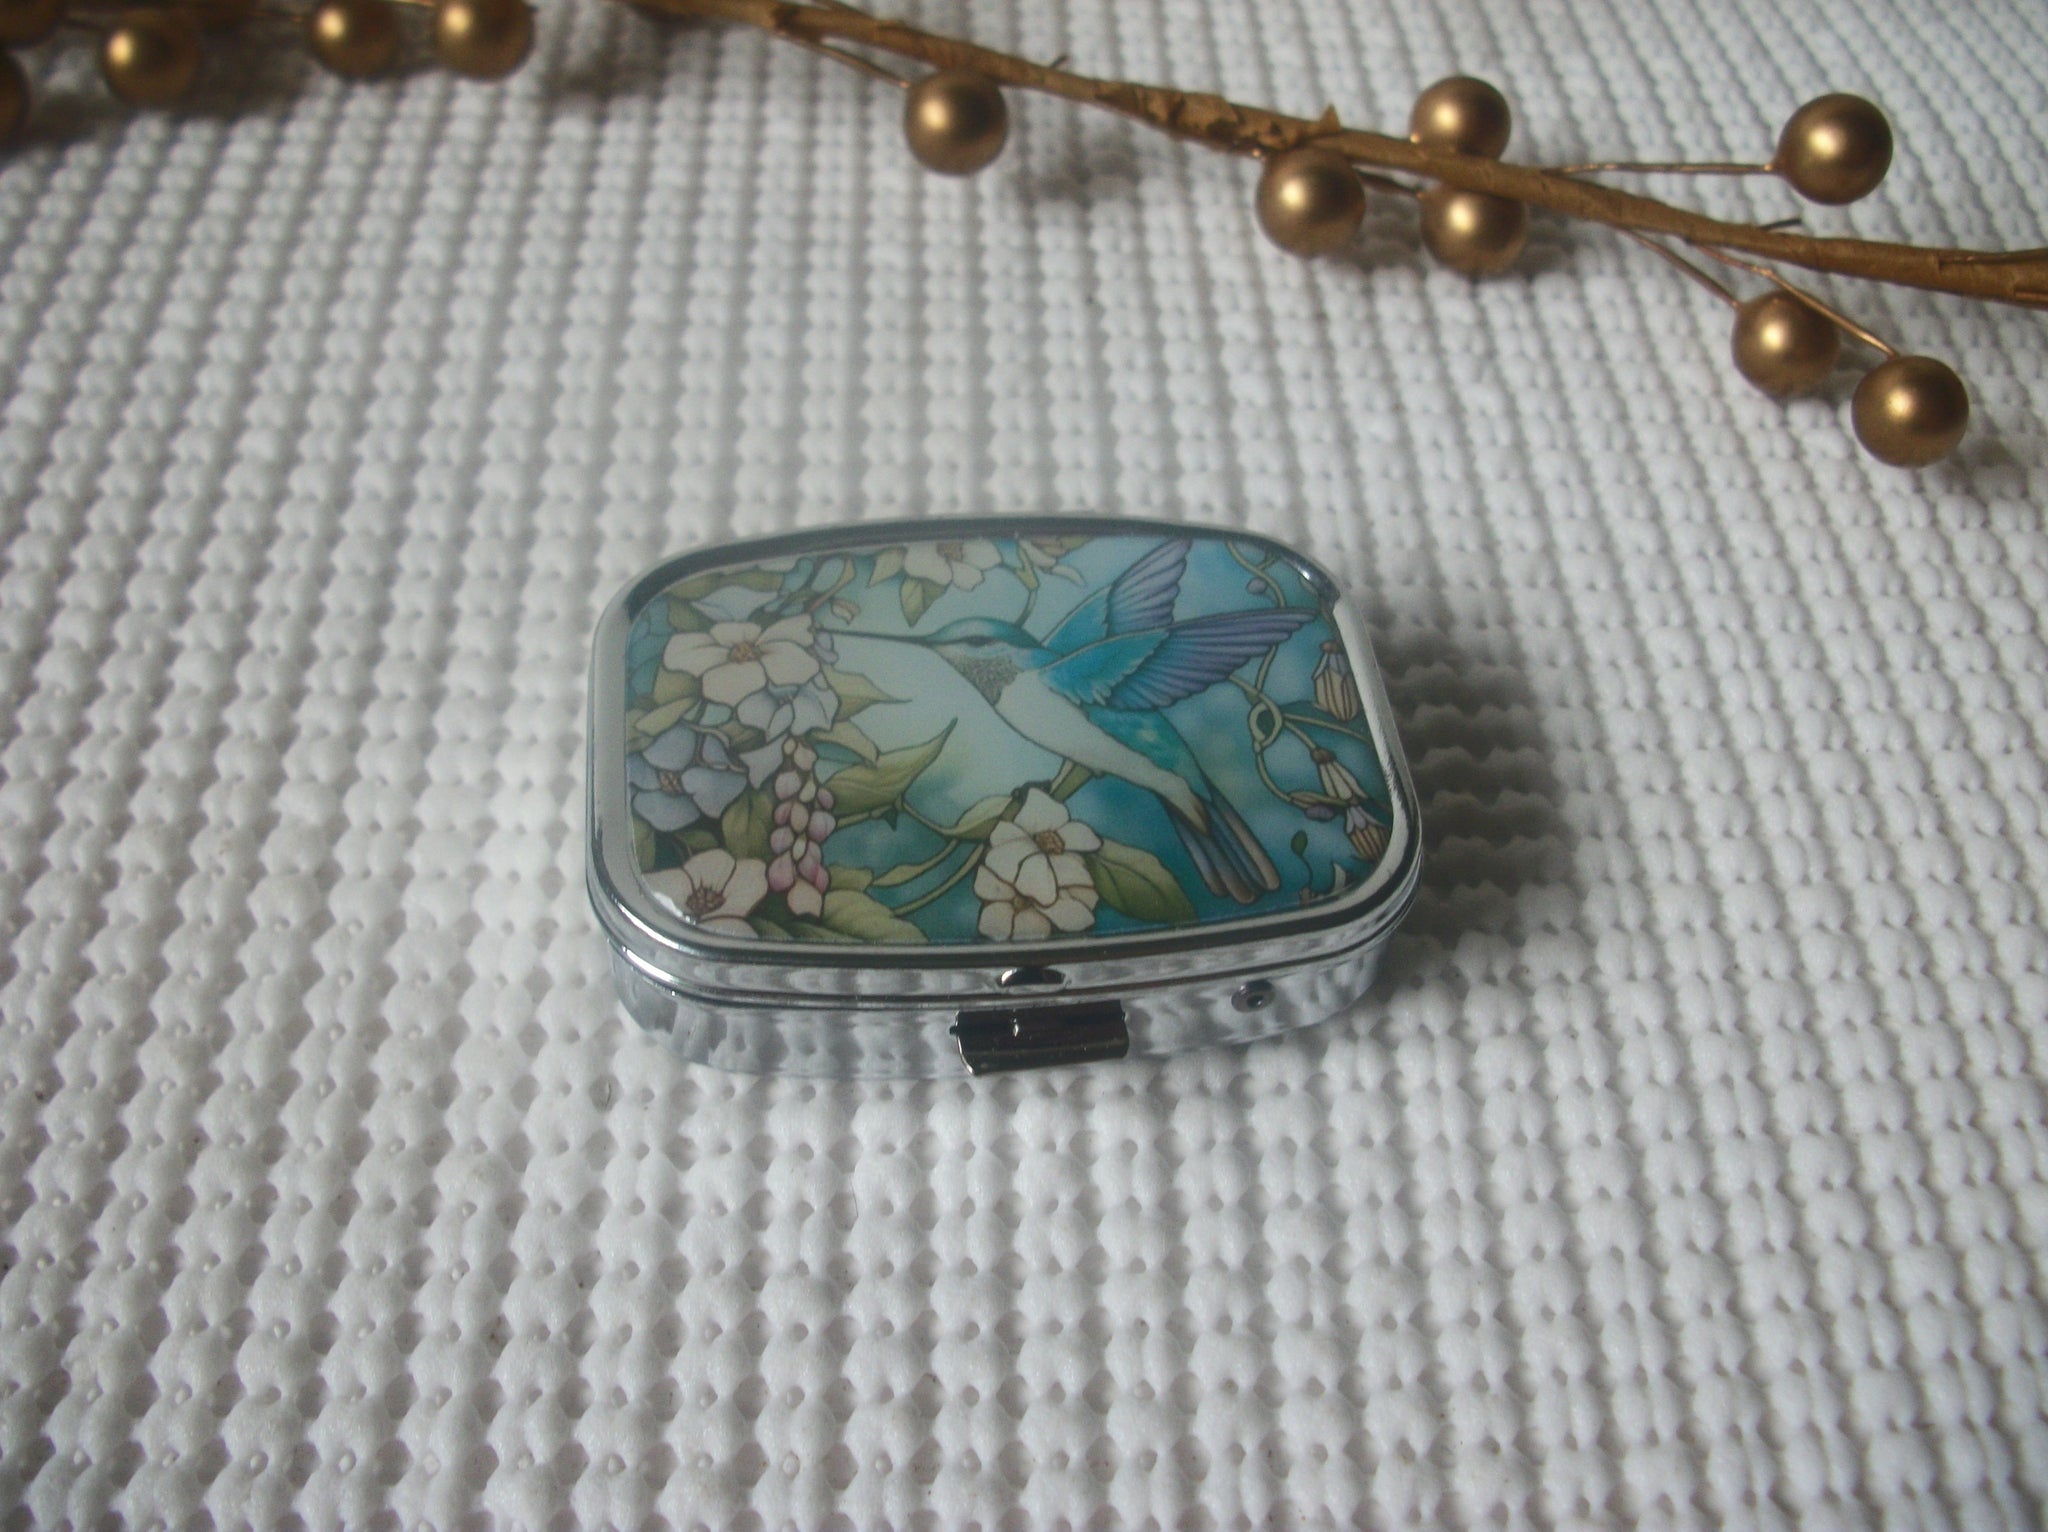 Vintage Stainless Steel Flying Hummingbird Pill Box Square Tray 111216